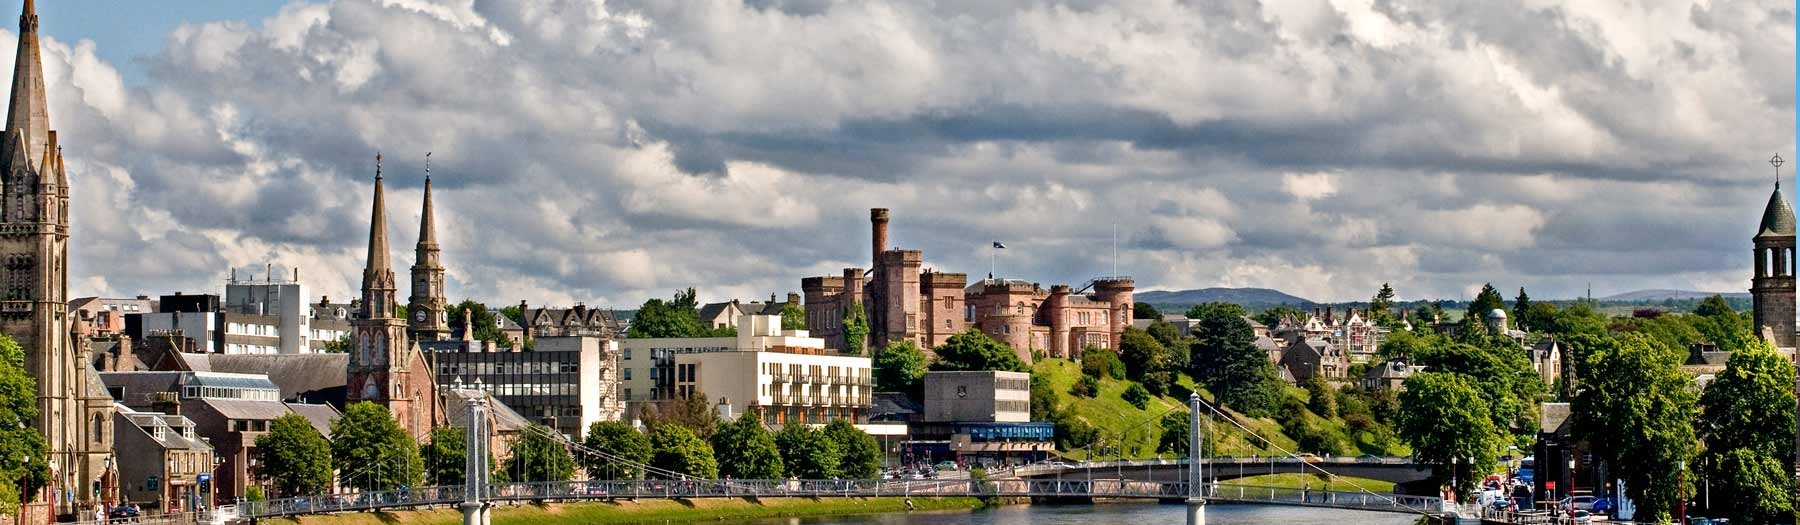 Image: Inverness Castle and the River Ness. Credit: Inverness Marketing group.